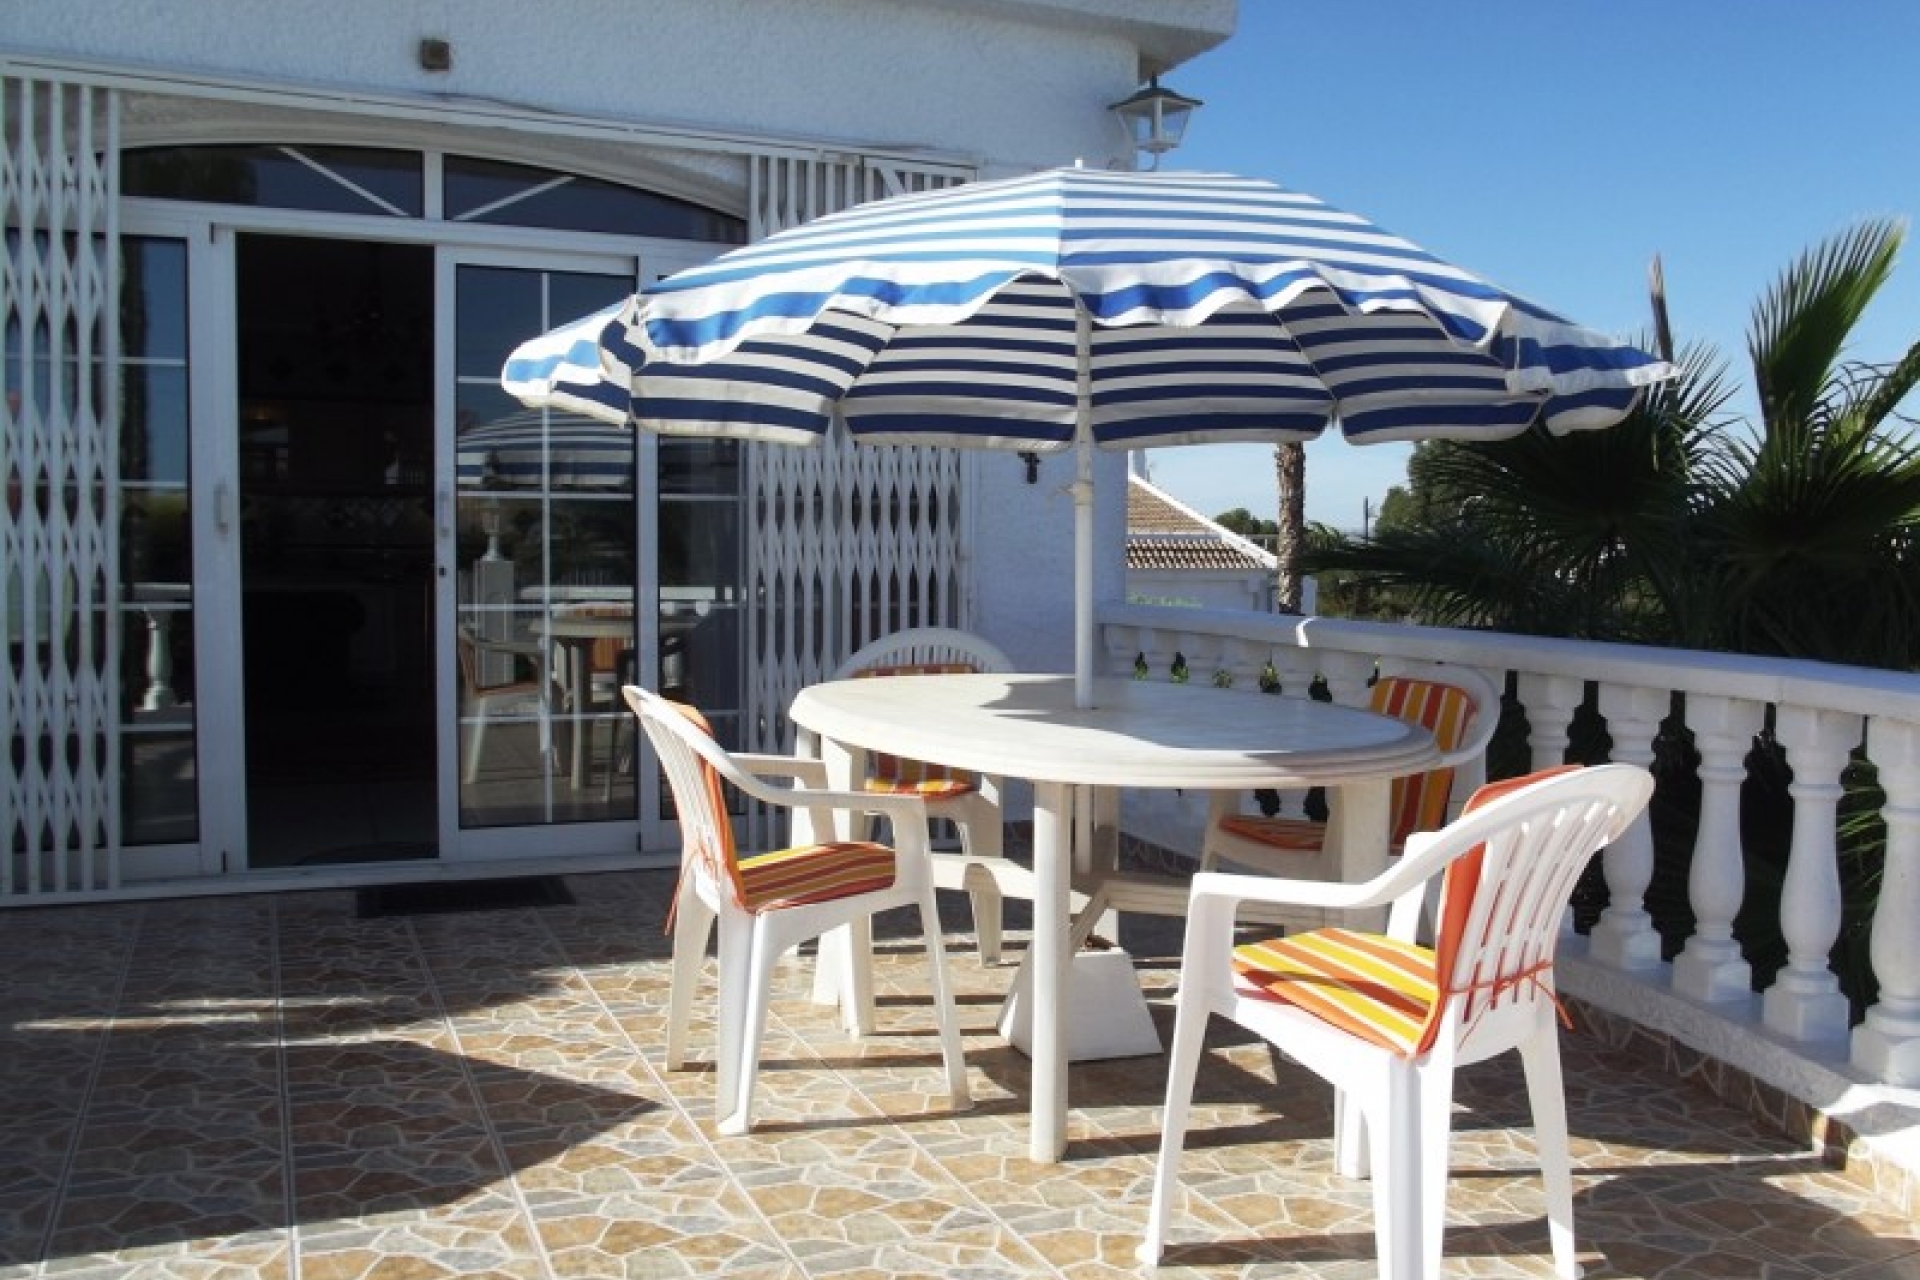 For sale cheap bargain property Spain costa blanca